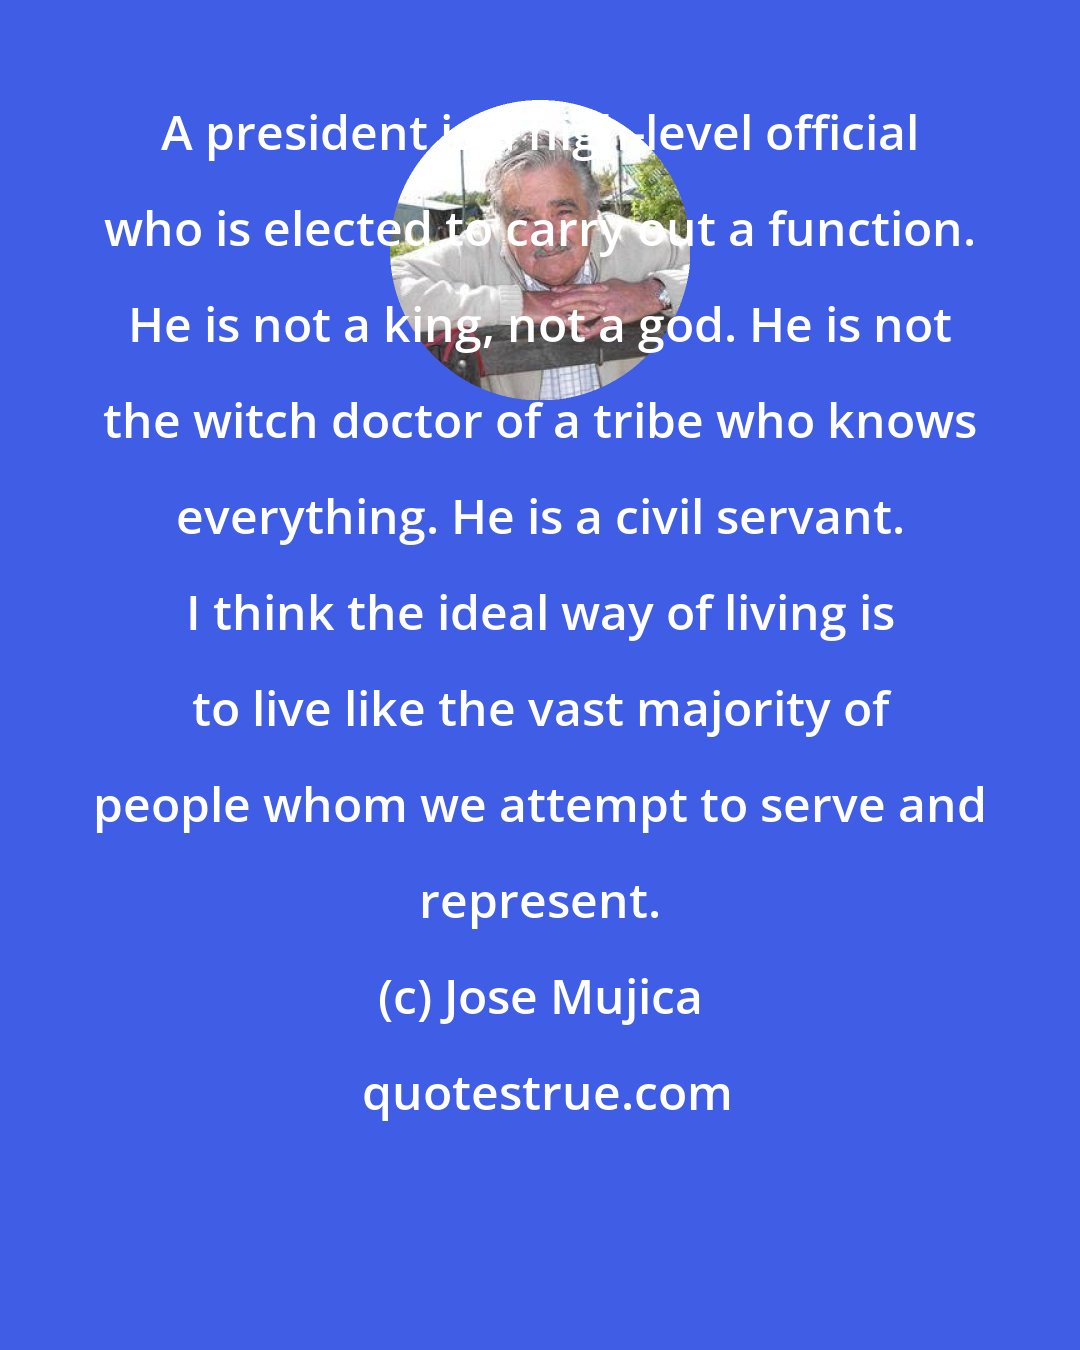 Jose Mujica: A president is a high-level official who is elected to carry out a function. He is not a king, not a god. He is not the witch doctor of a tribe who knows everything. He is a civil servant. I think the ideal way of living is to live like the vast majority of people whom we attempt to serve and represent.